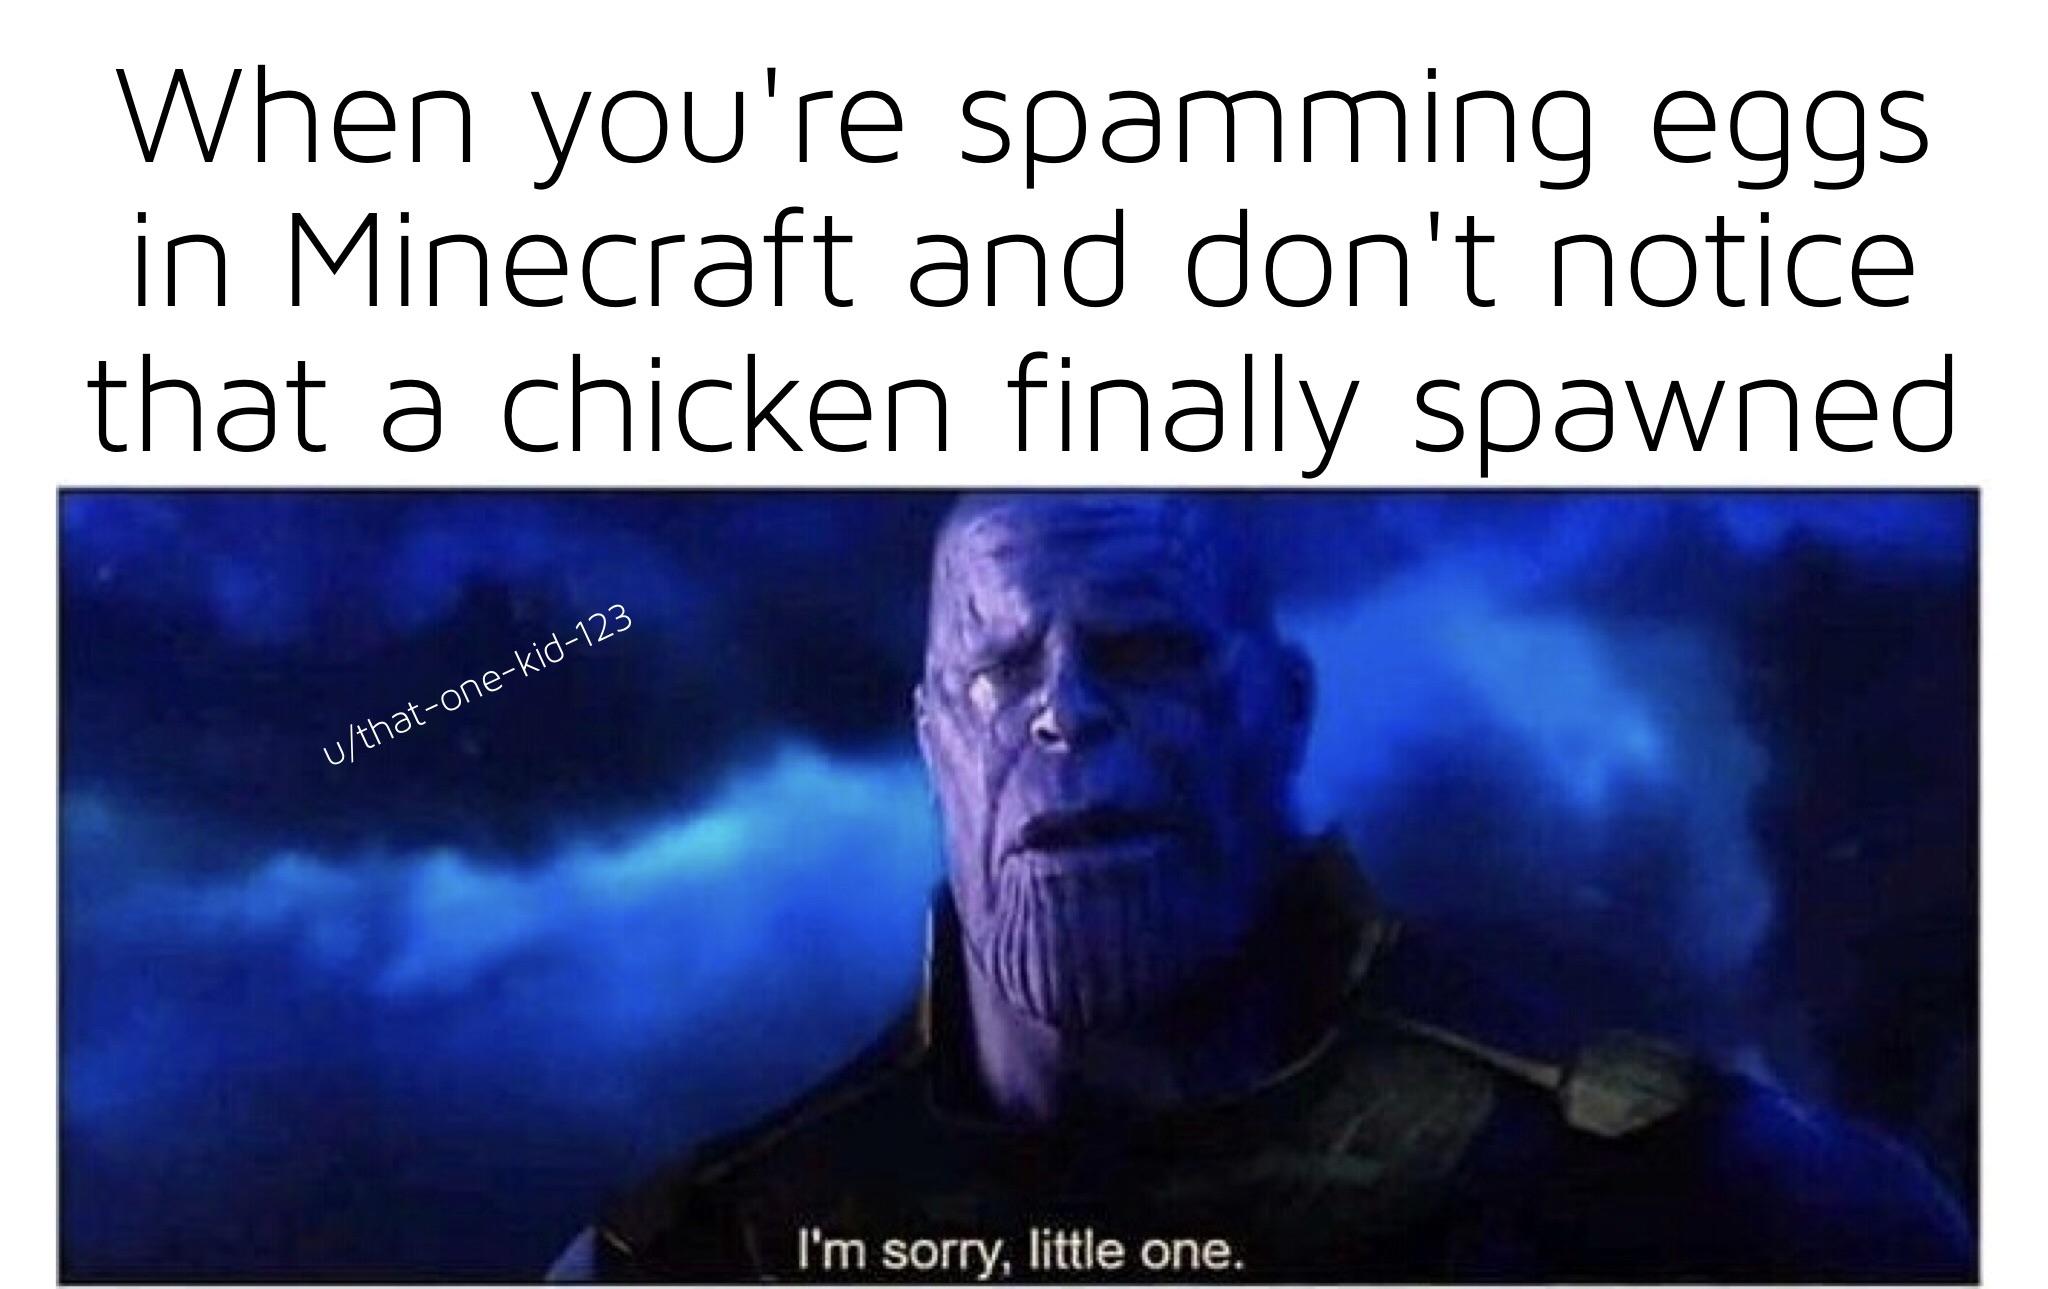 sad minecraft noises - When you're spamming eggs in Minecraft and don't notice that a chicken finally spawned uthatonekid123 I'm sorry, little one.